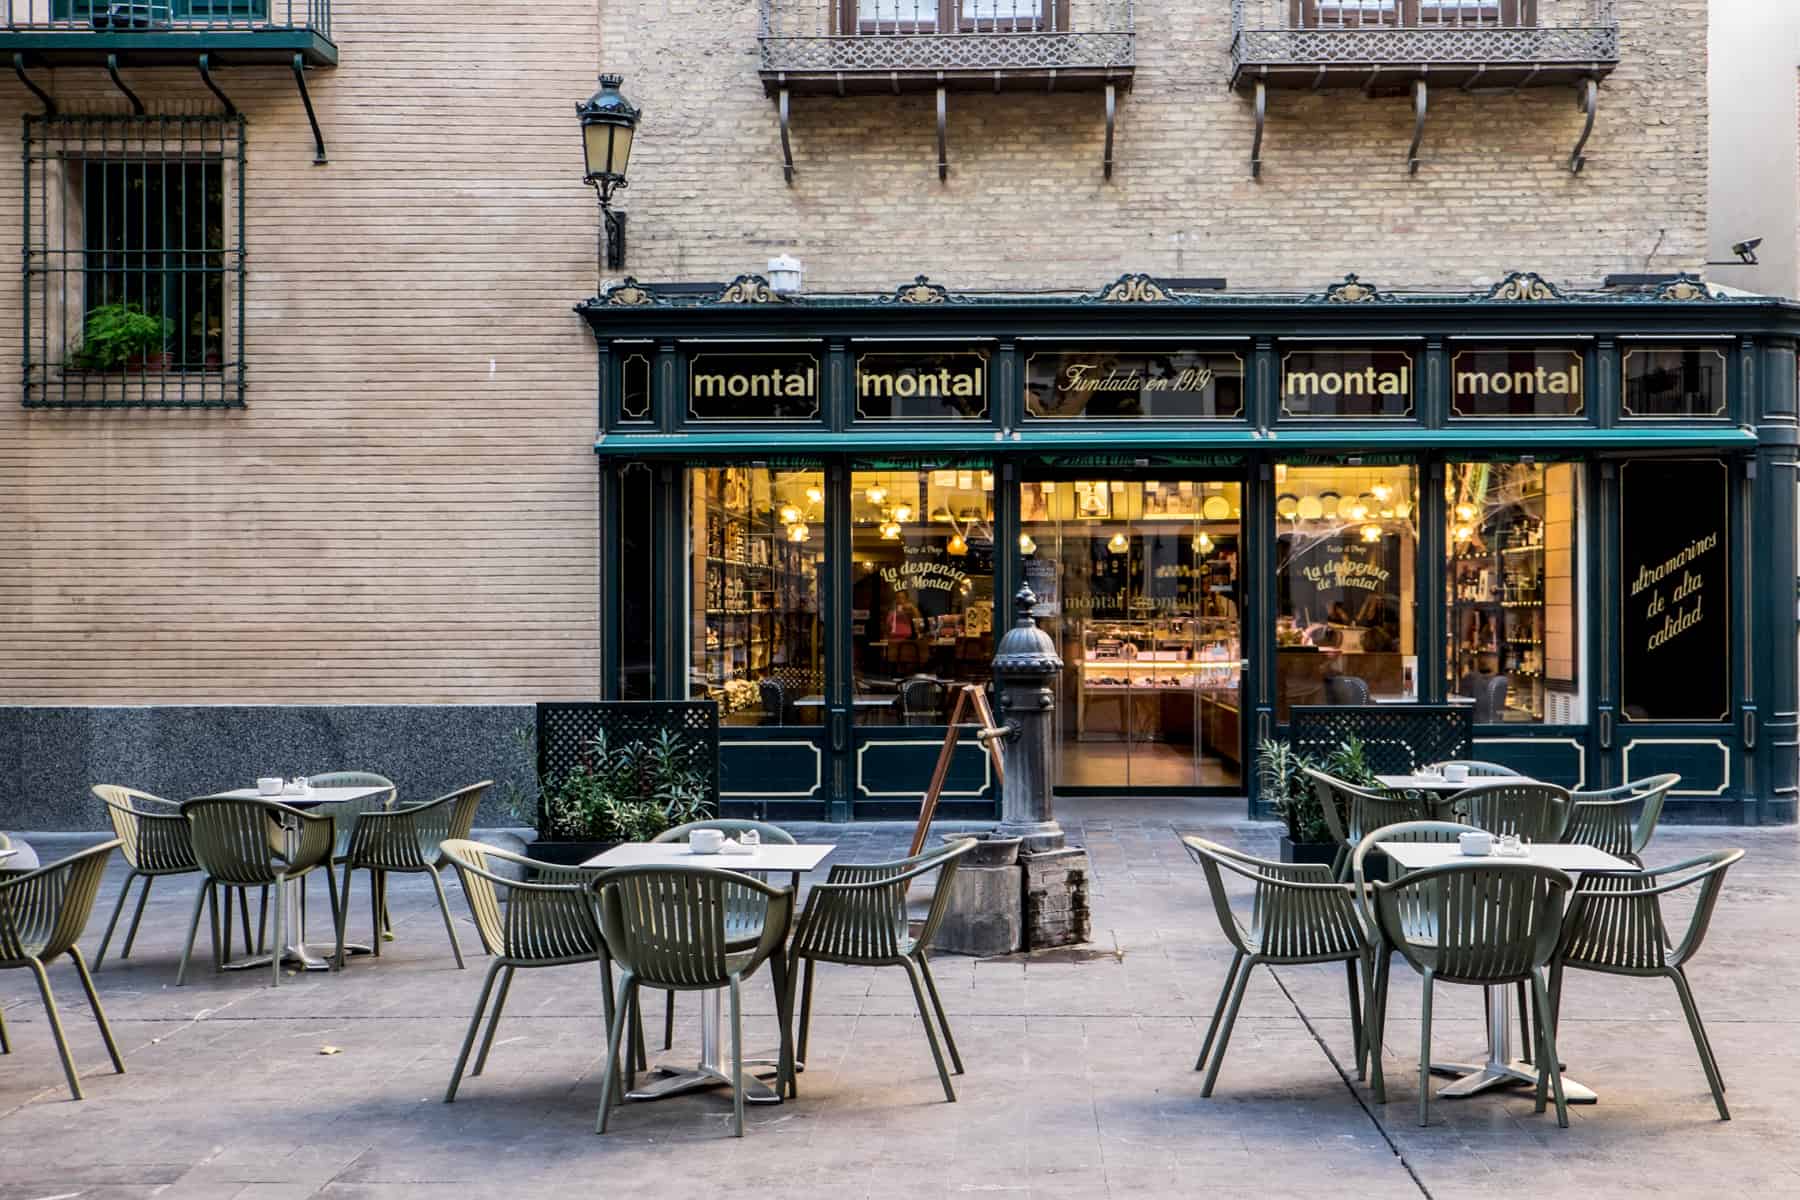 Empty tables and chairs outside a black panelled restaurant exterior which lists the word "montal" four times.